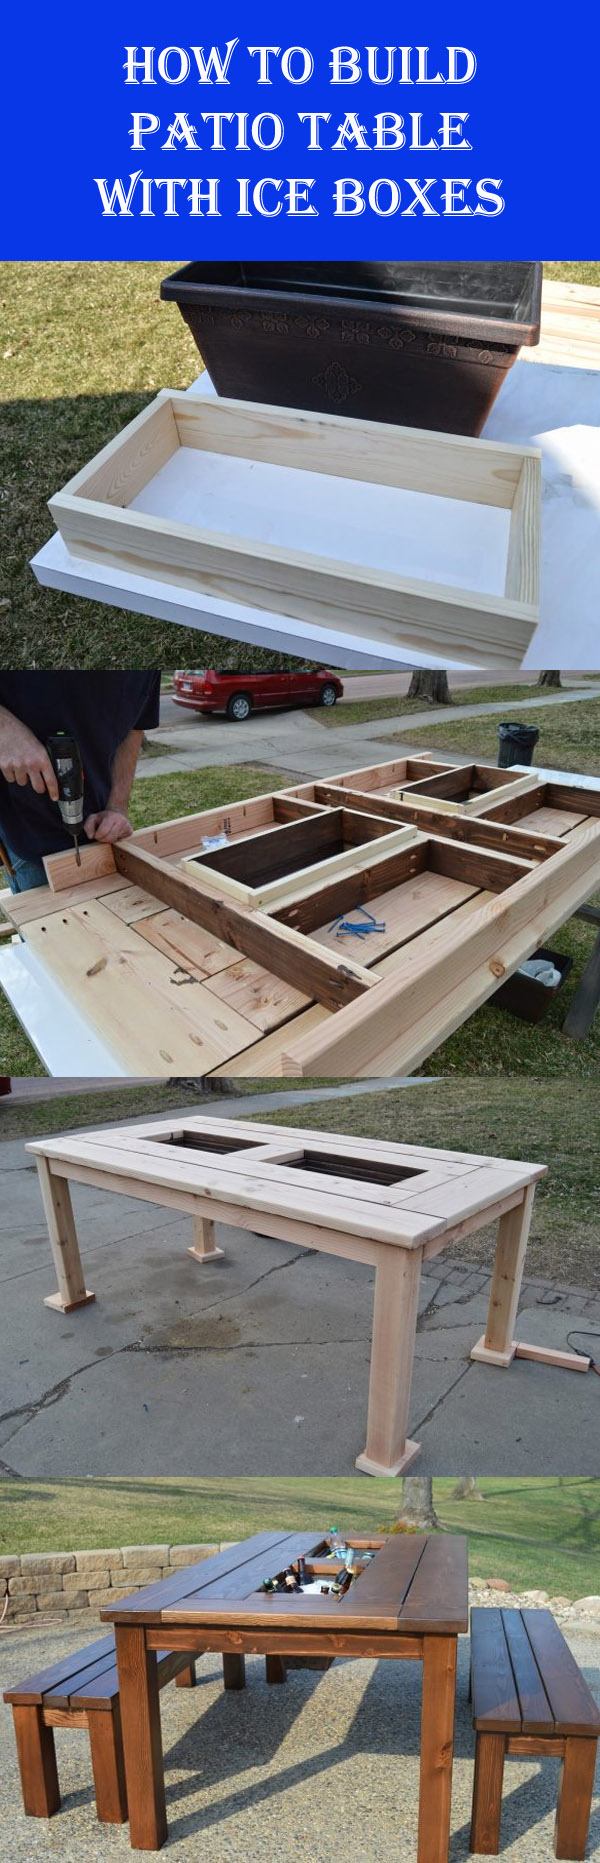 DIY Patio Table With Built-In Ice Boxes